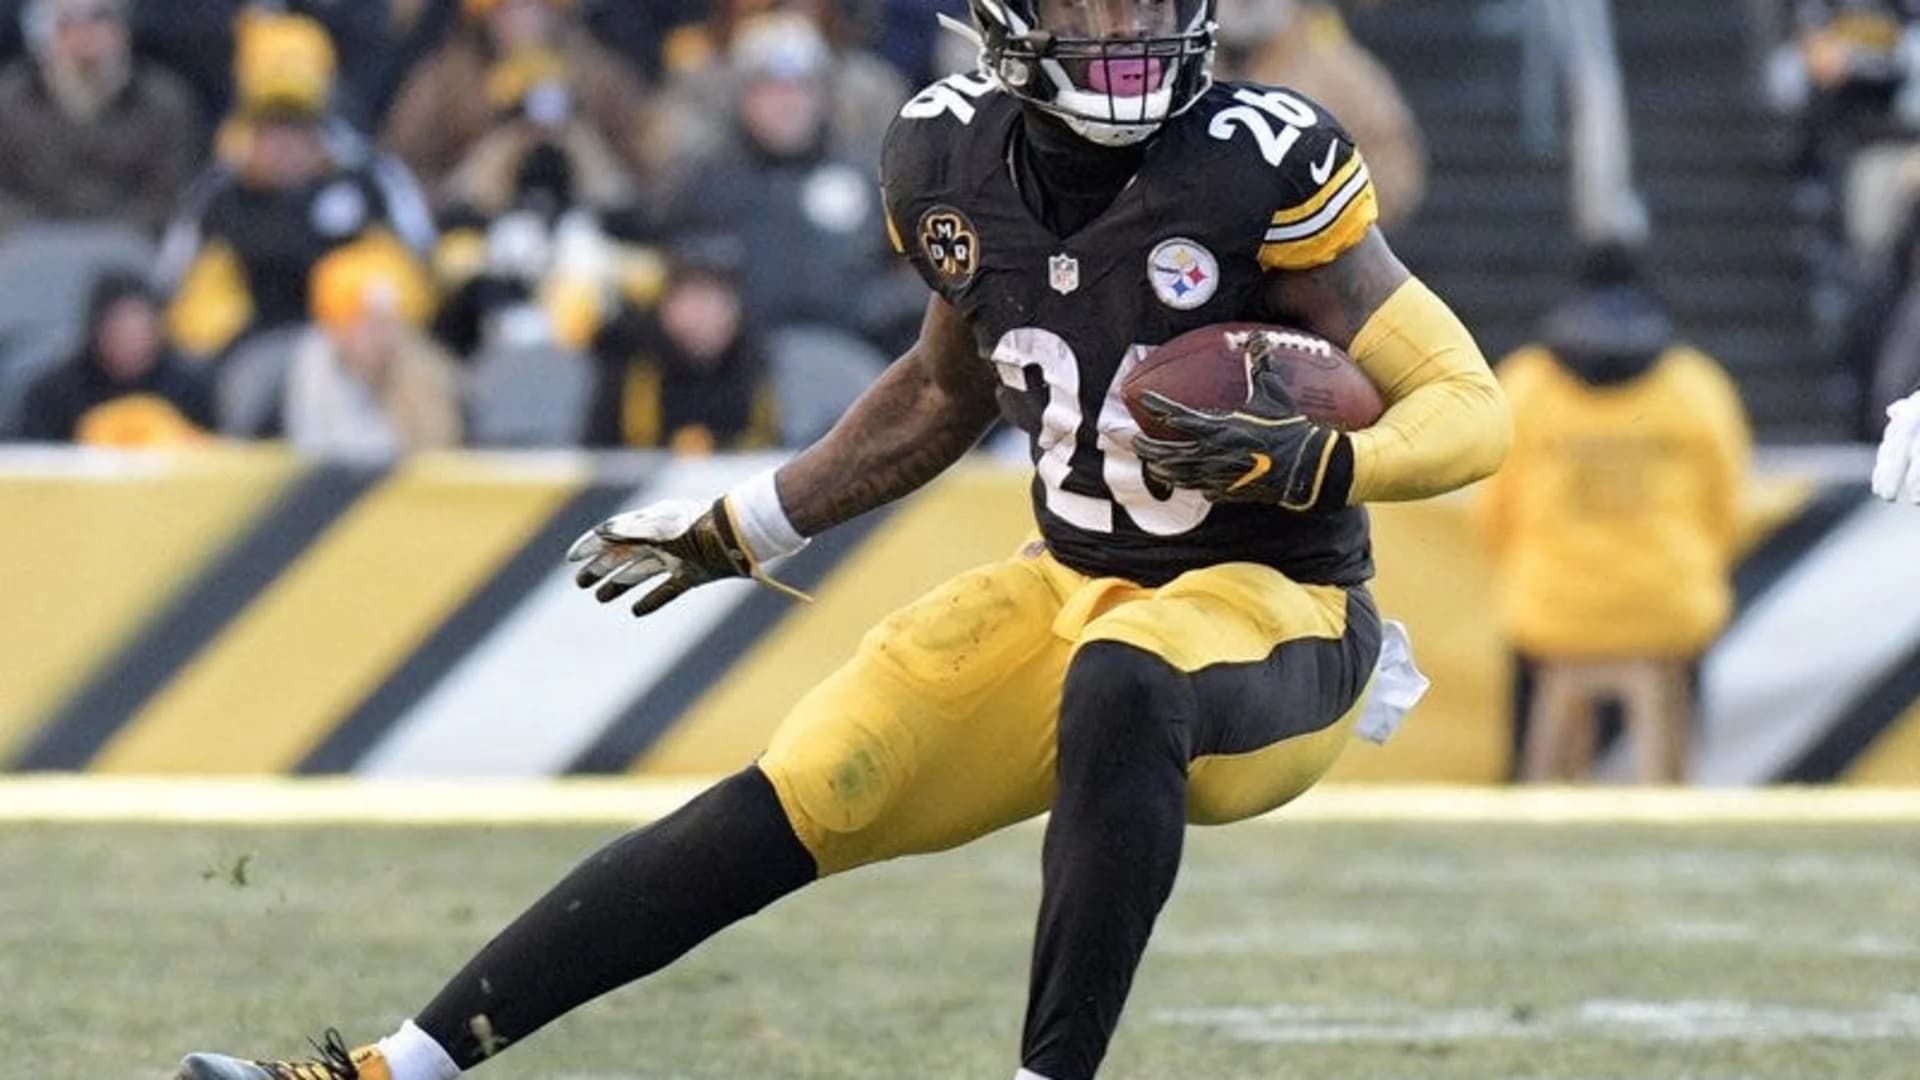 AP source: Jets agree to sign RB Le'Veon Bell